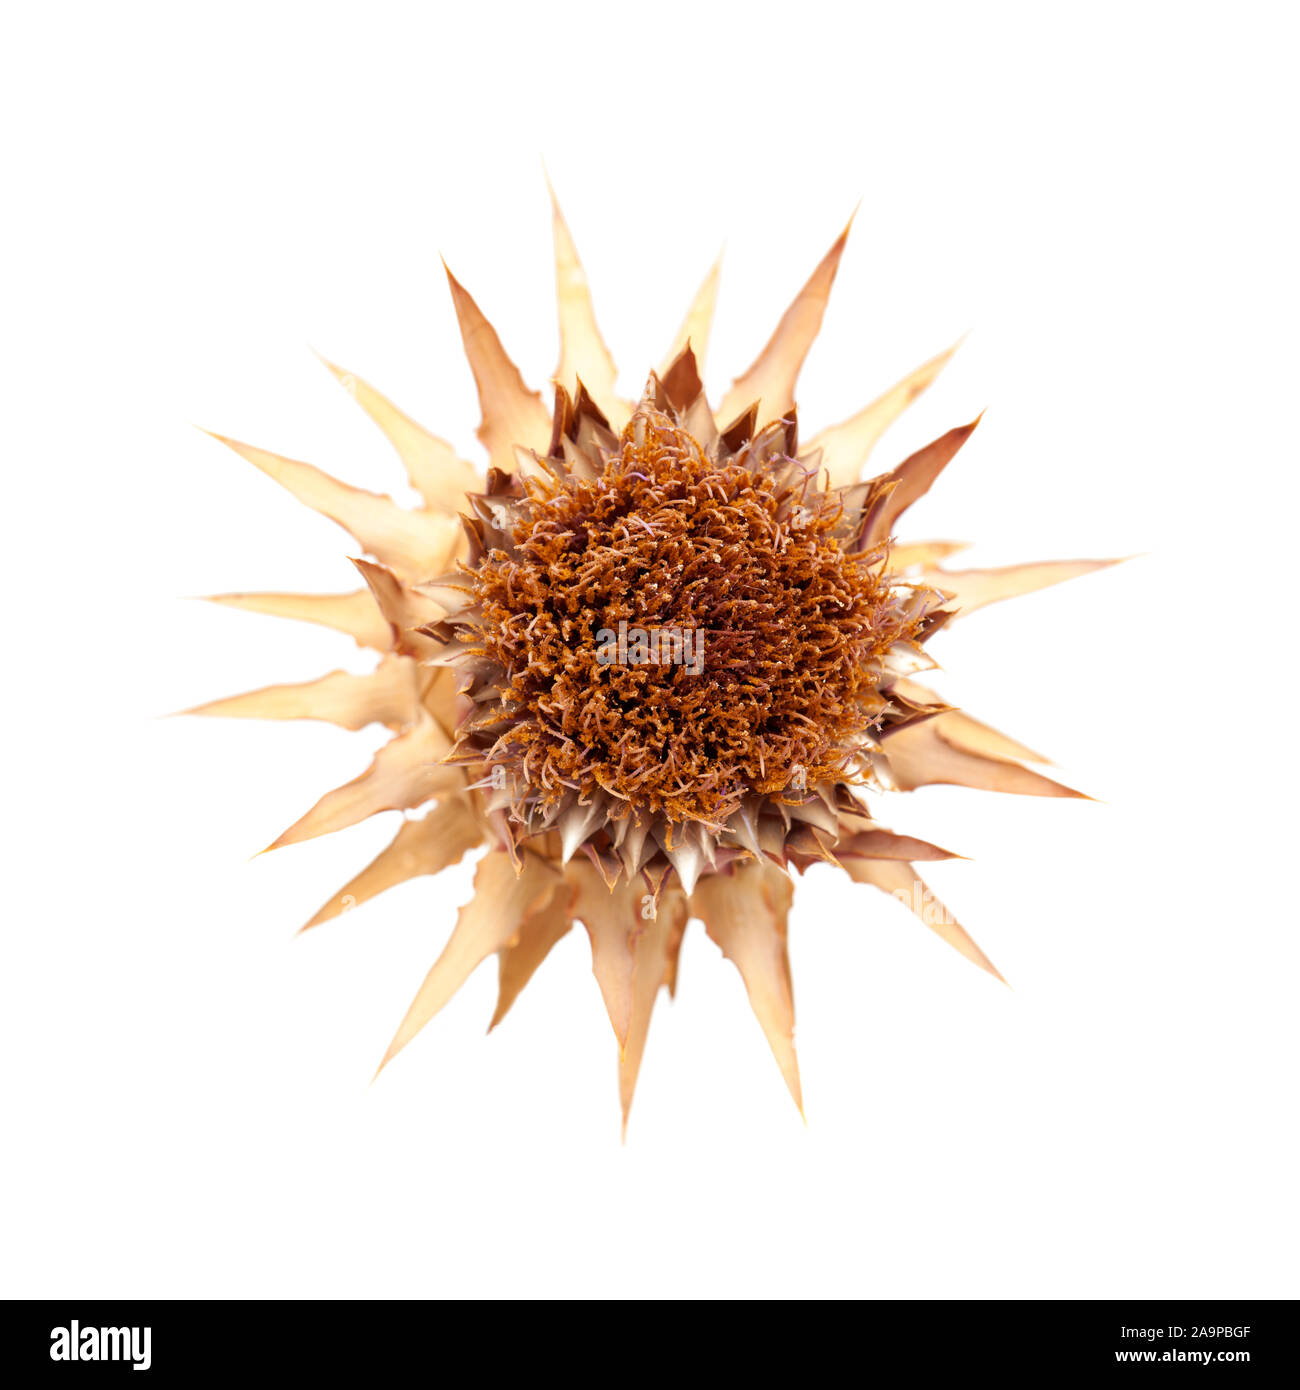 dried artichoke flower isolated on white background Stock Photo